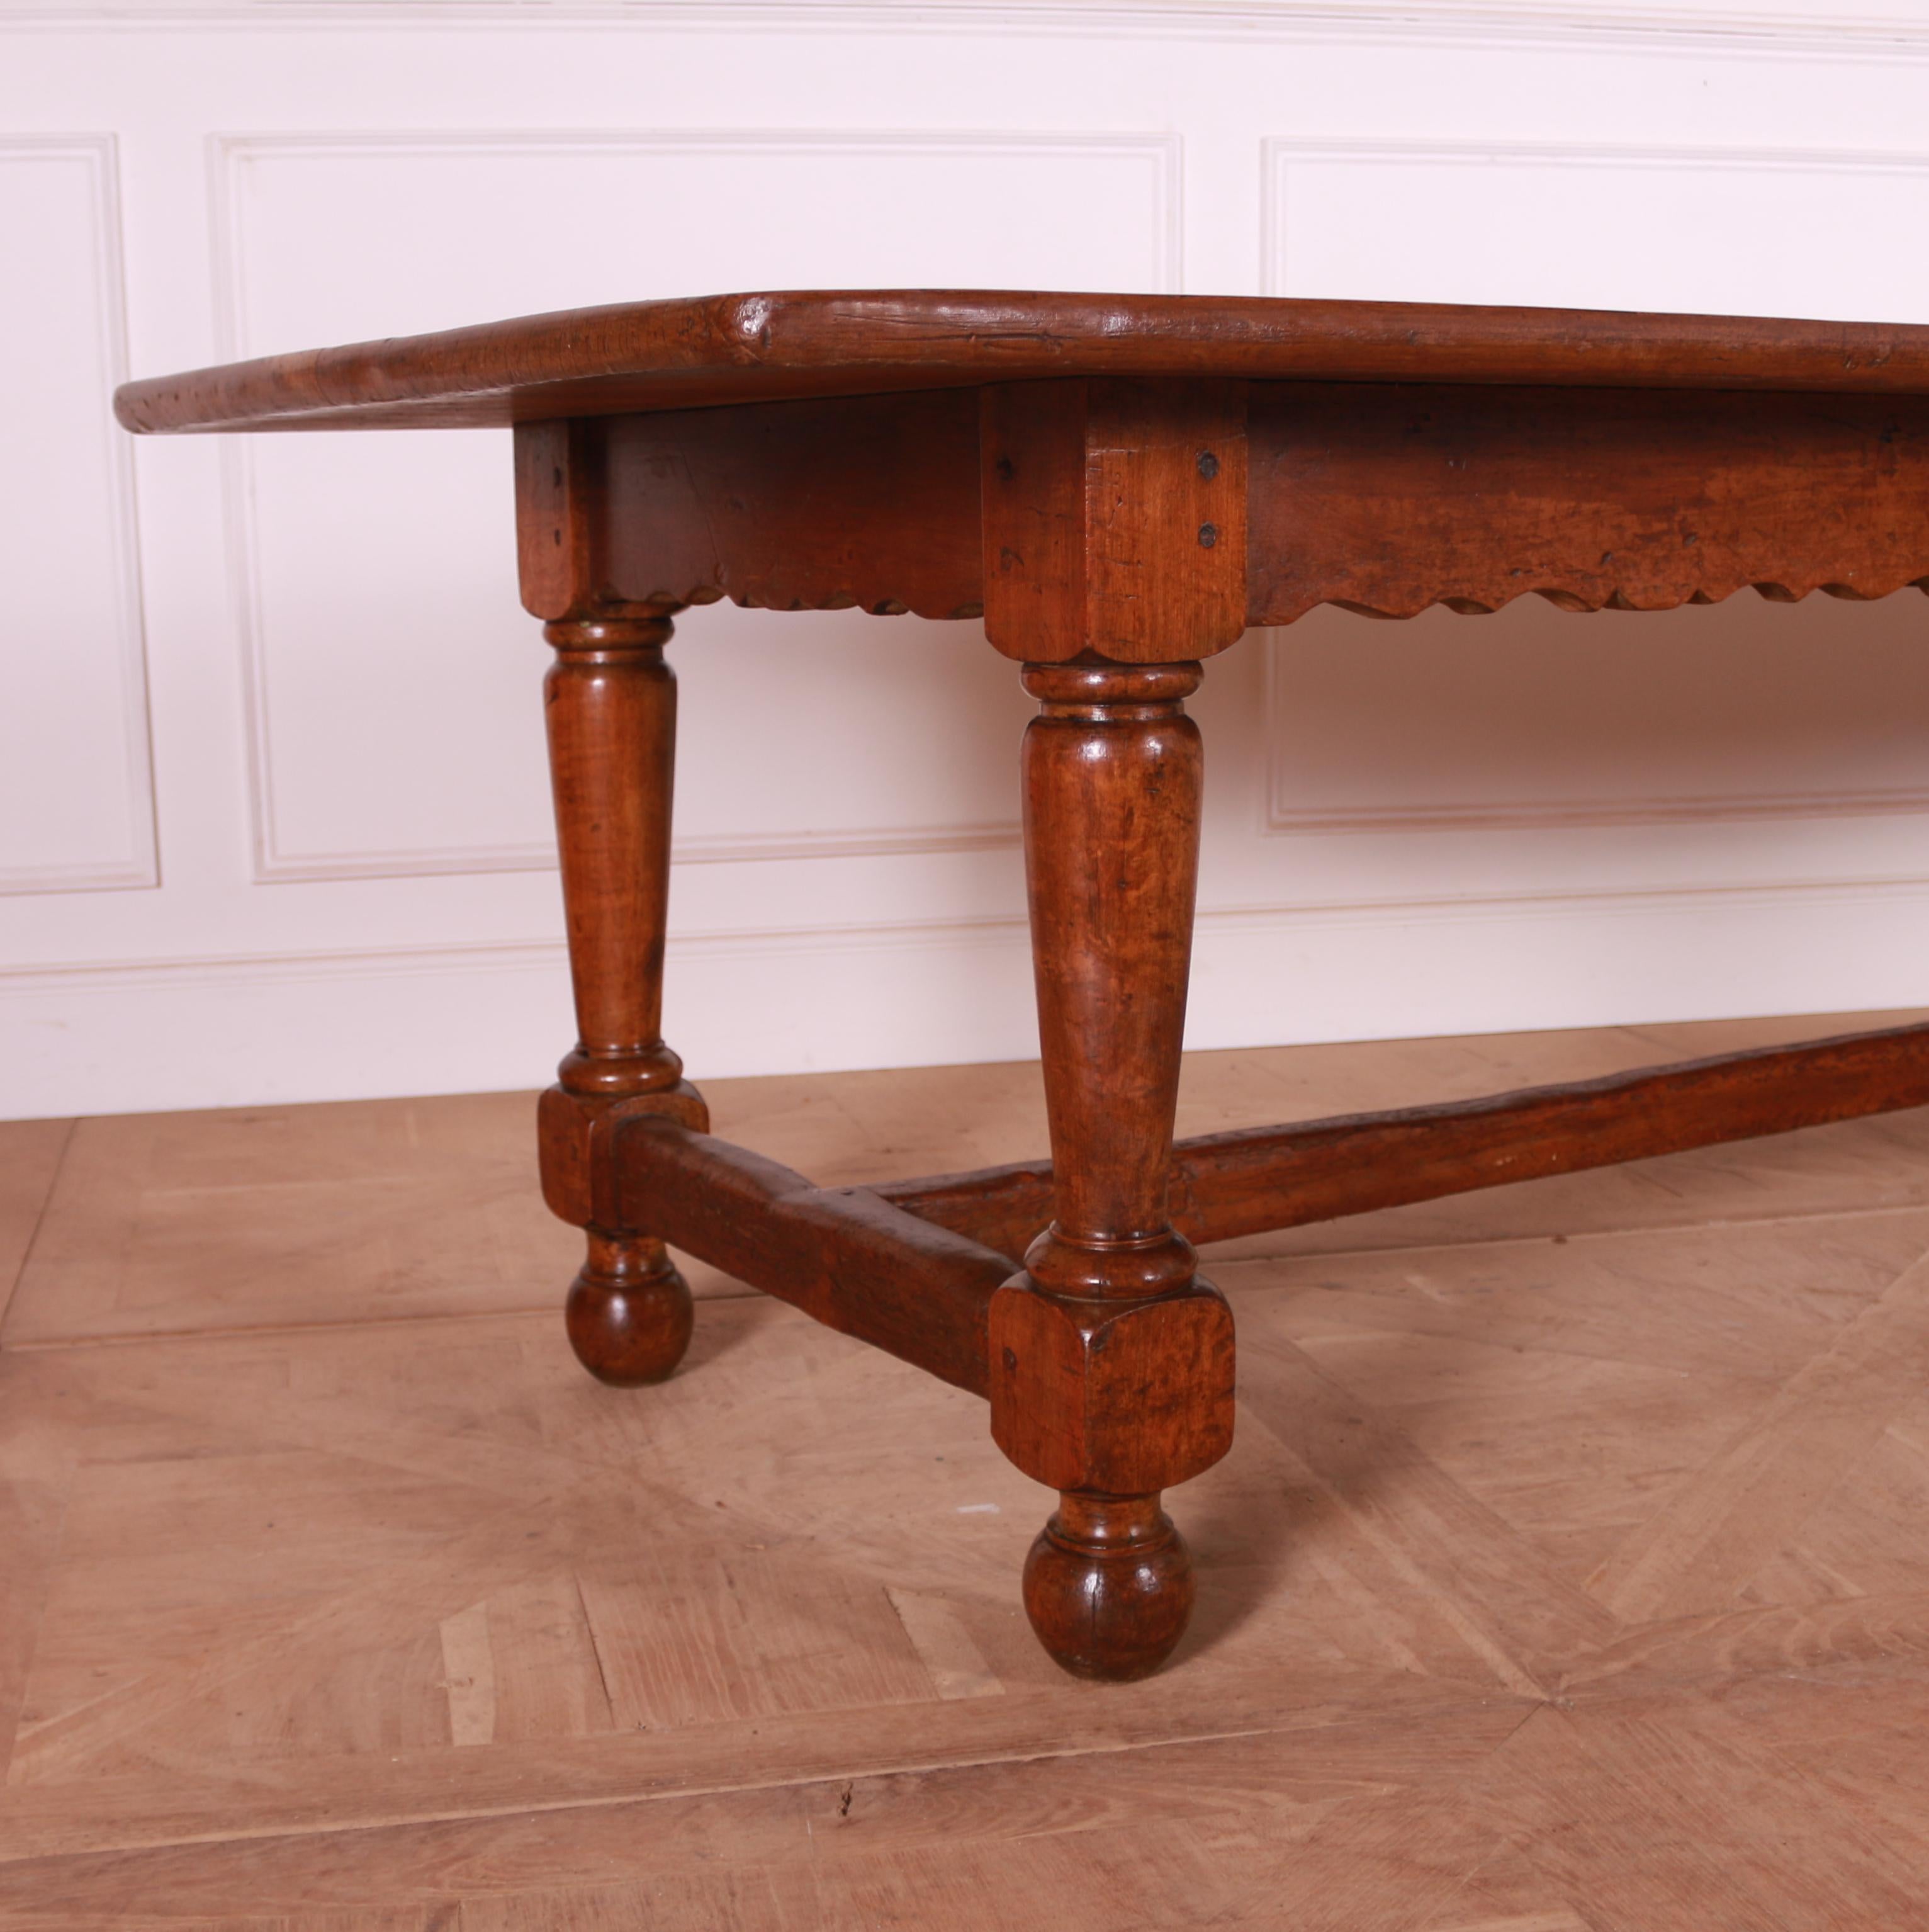 Wonderful 19th C large English walnut farmhouse table with a fantastic colour. 1860.

Reference: 7652

Dimensions
120.5 inches (306 cms) Wide
38 inches (97 cms) Deep
31 inches (79 cms) High